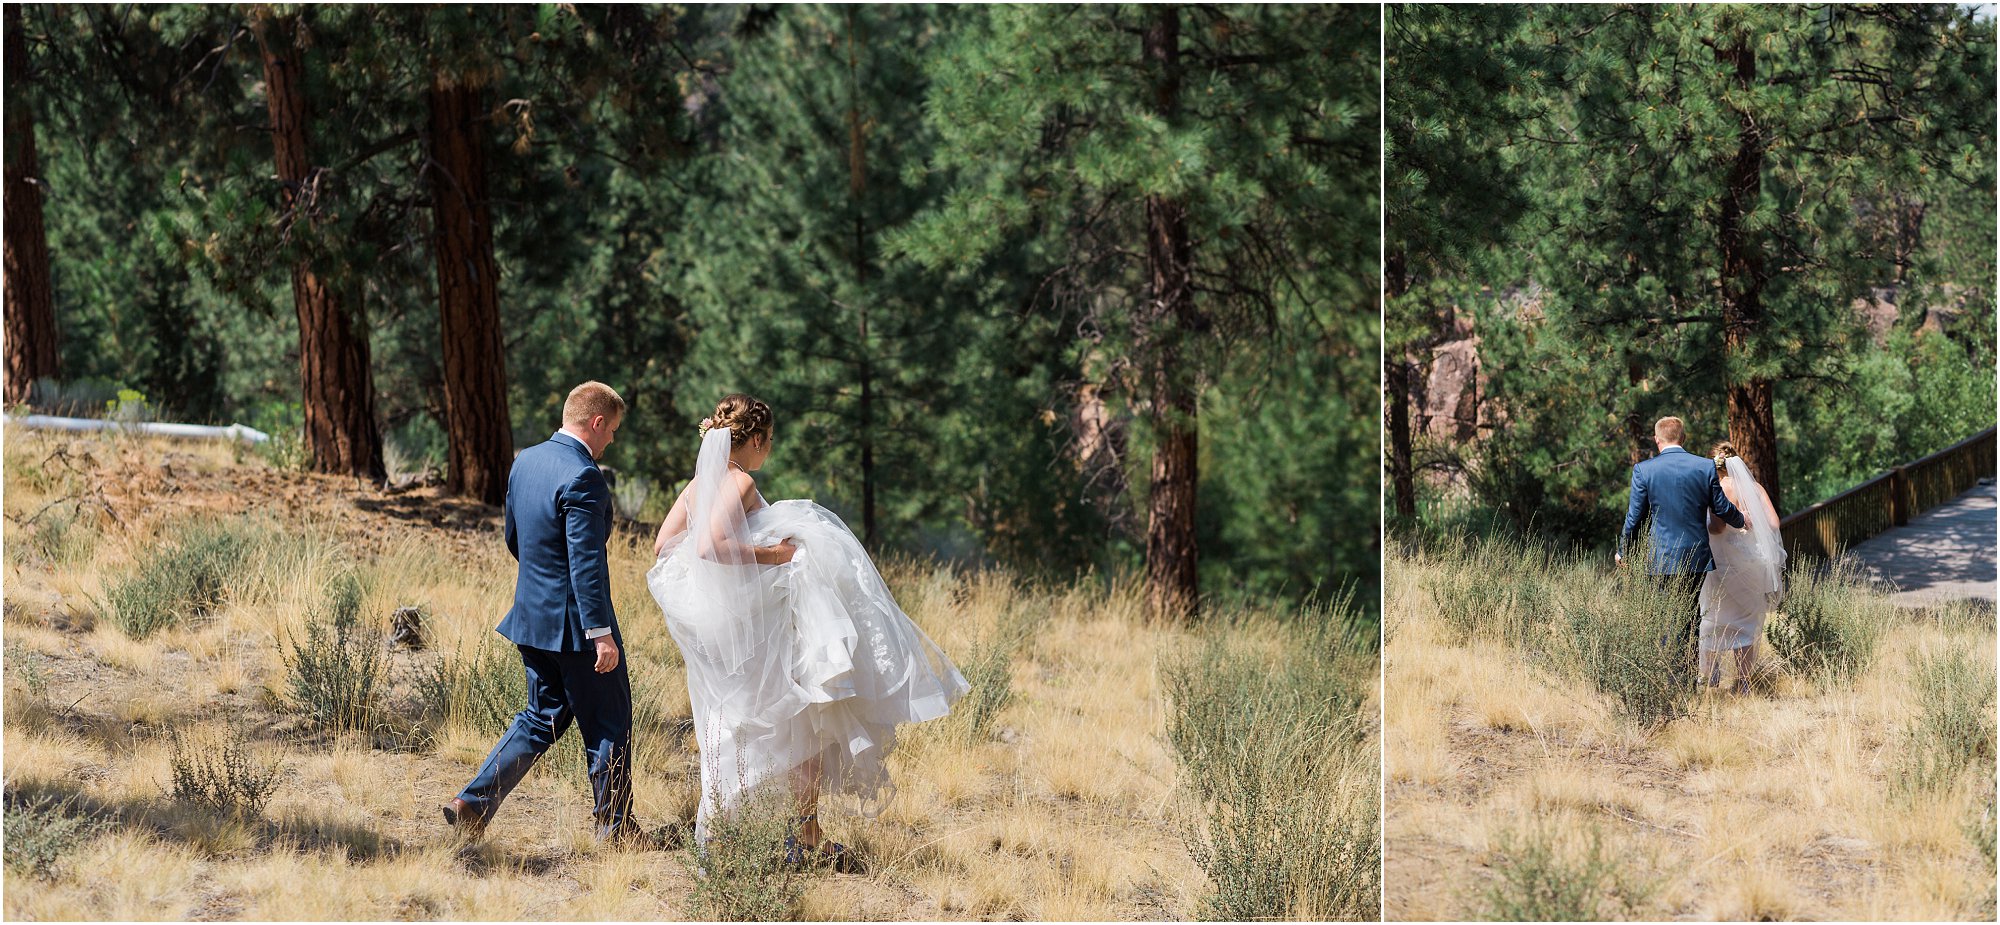 This wedding couple enjoys a private moment after their first look to exchange their wedding gifts to each other at Rock Springs Ranch in Bend, OR. | Erica Swantek Photography